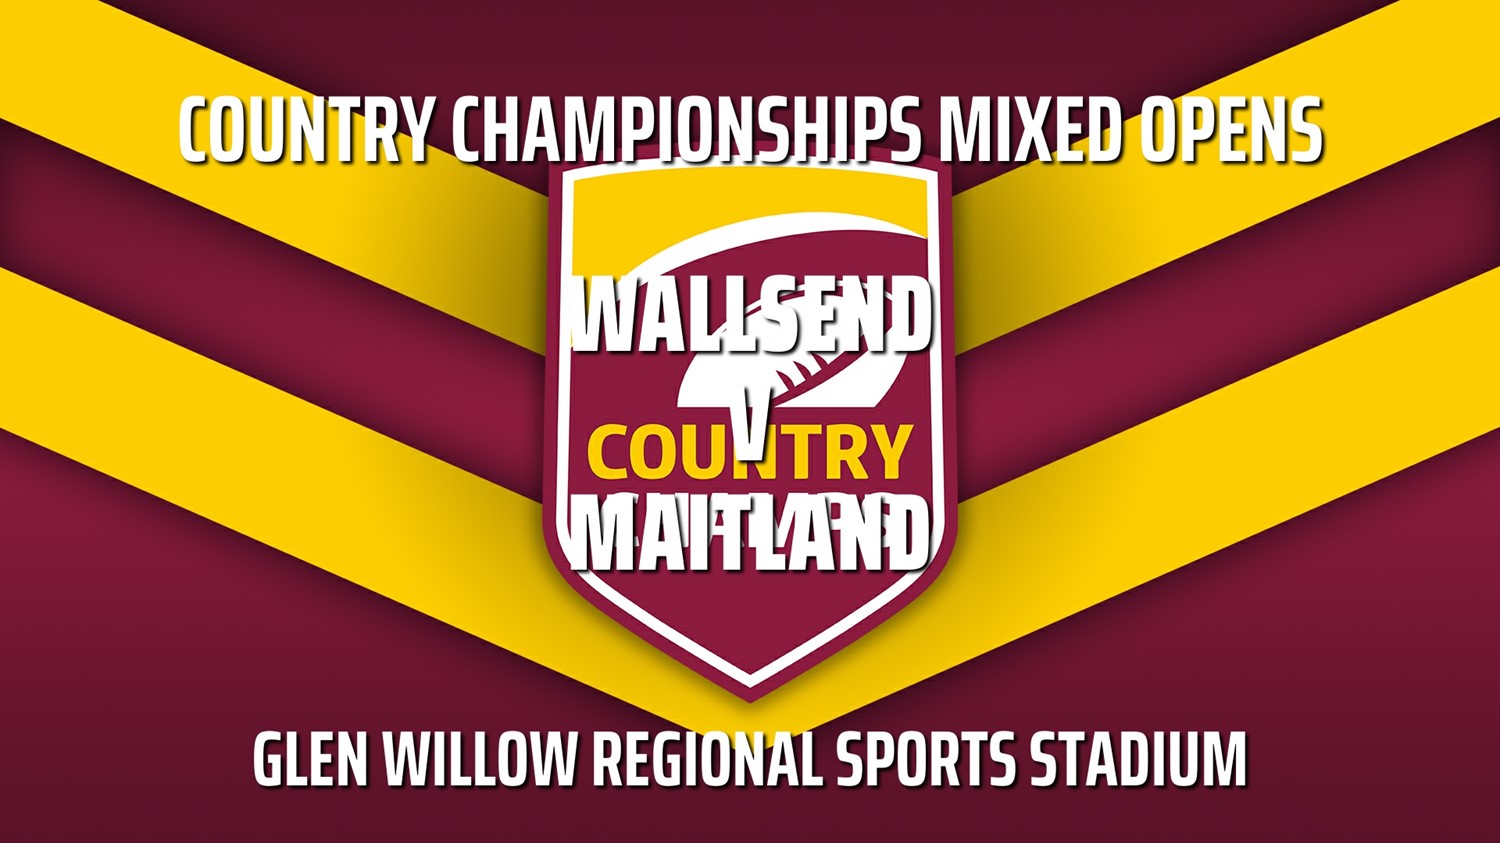 231014-Country Championships Mixed Opens - Wallsend Wolves v Maitland Redbacks touch Minigame Slate Image